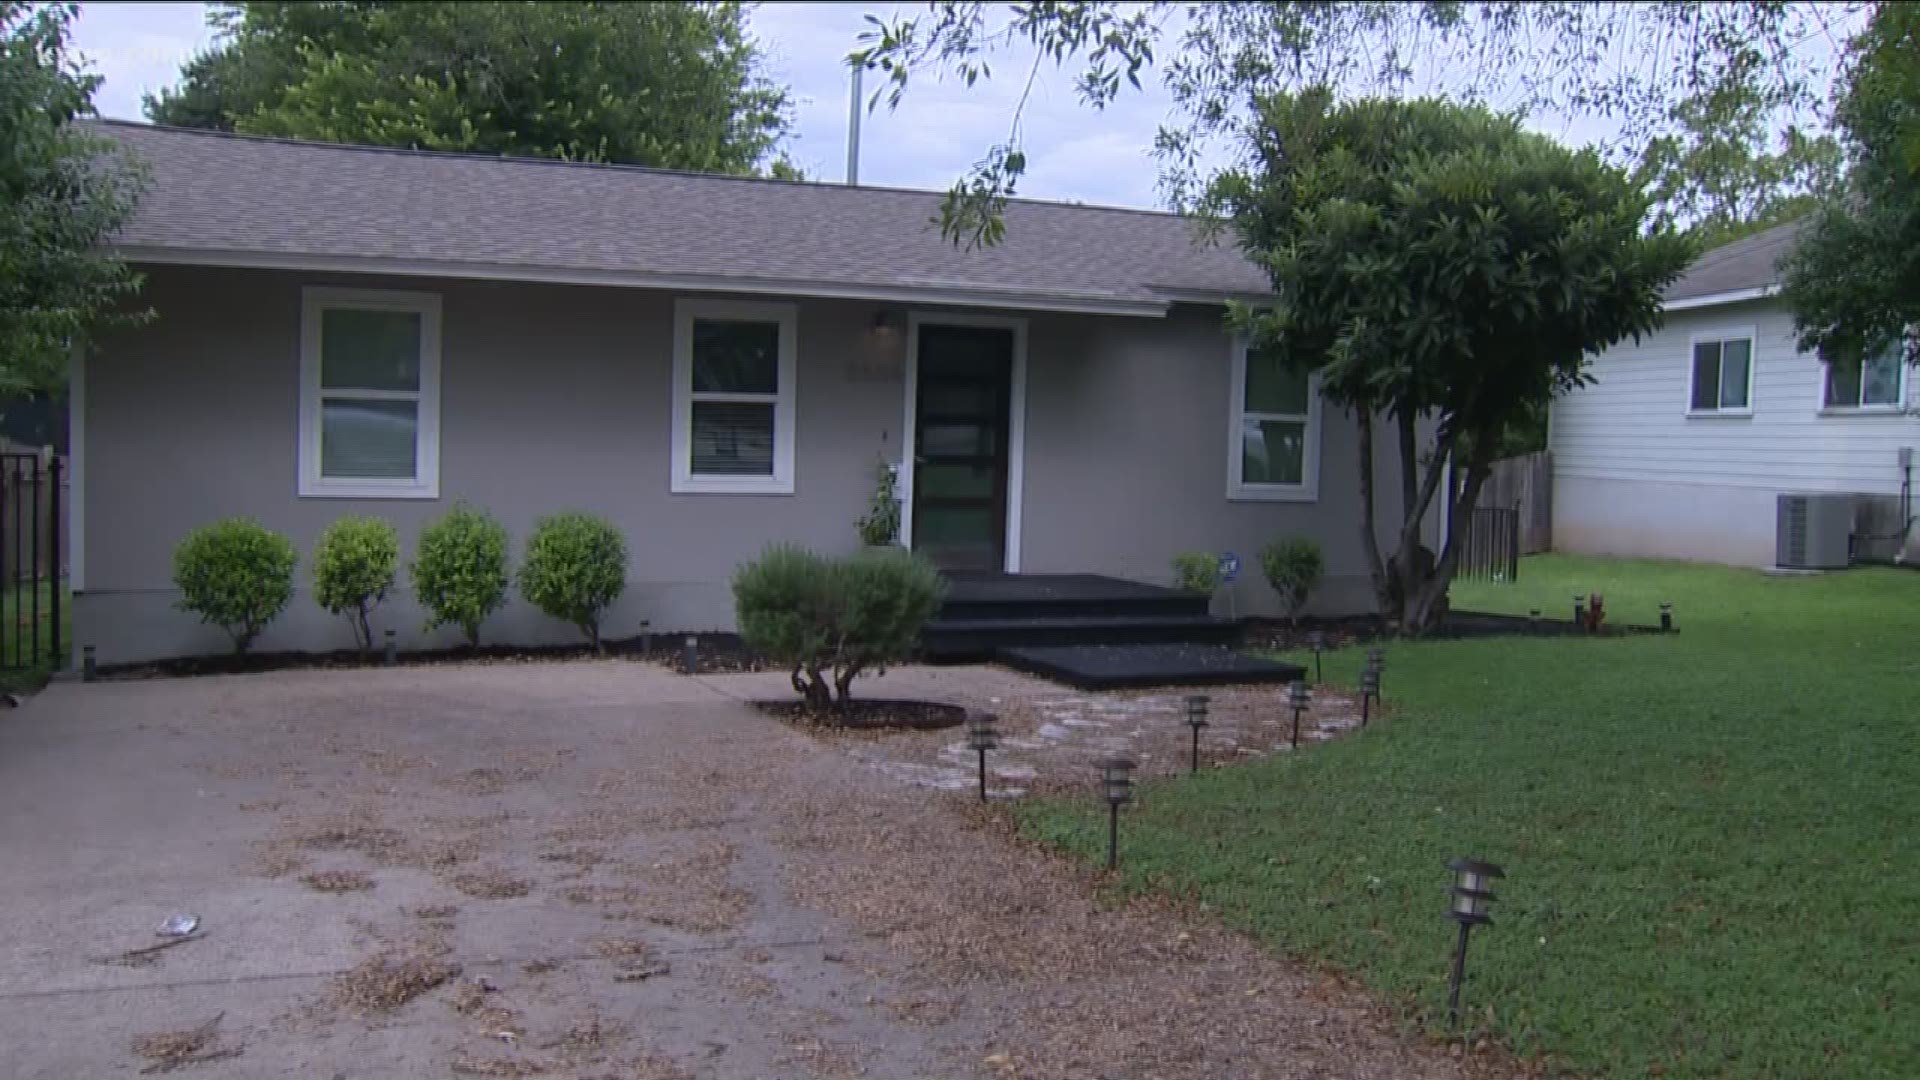 And according to a new Bank of America report, Millennials say homeownership is more of a priority than getting married or having children. But KVUE's Christy Millweard shows us how some home buying myths are still holding some millenials back. 